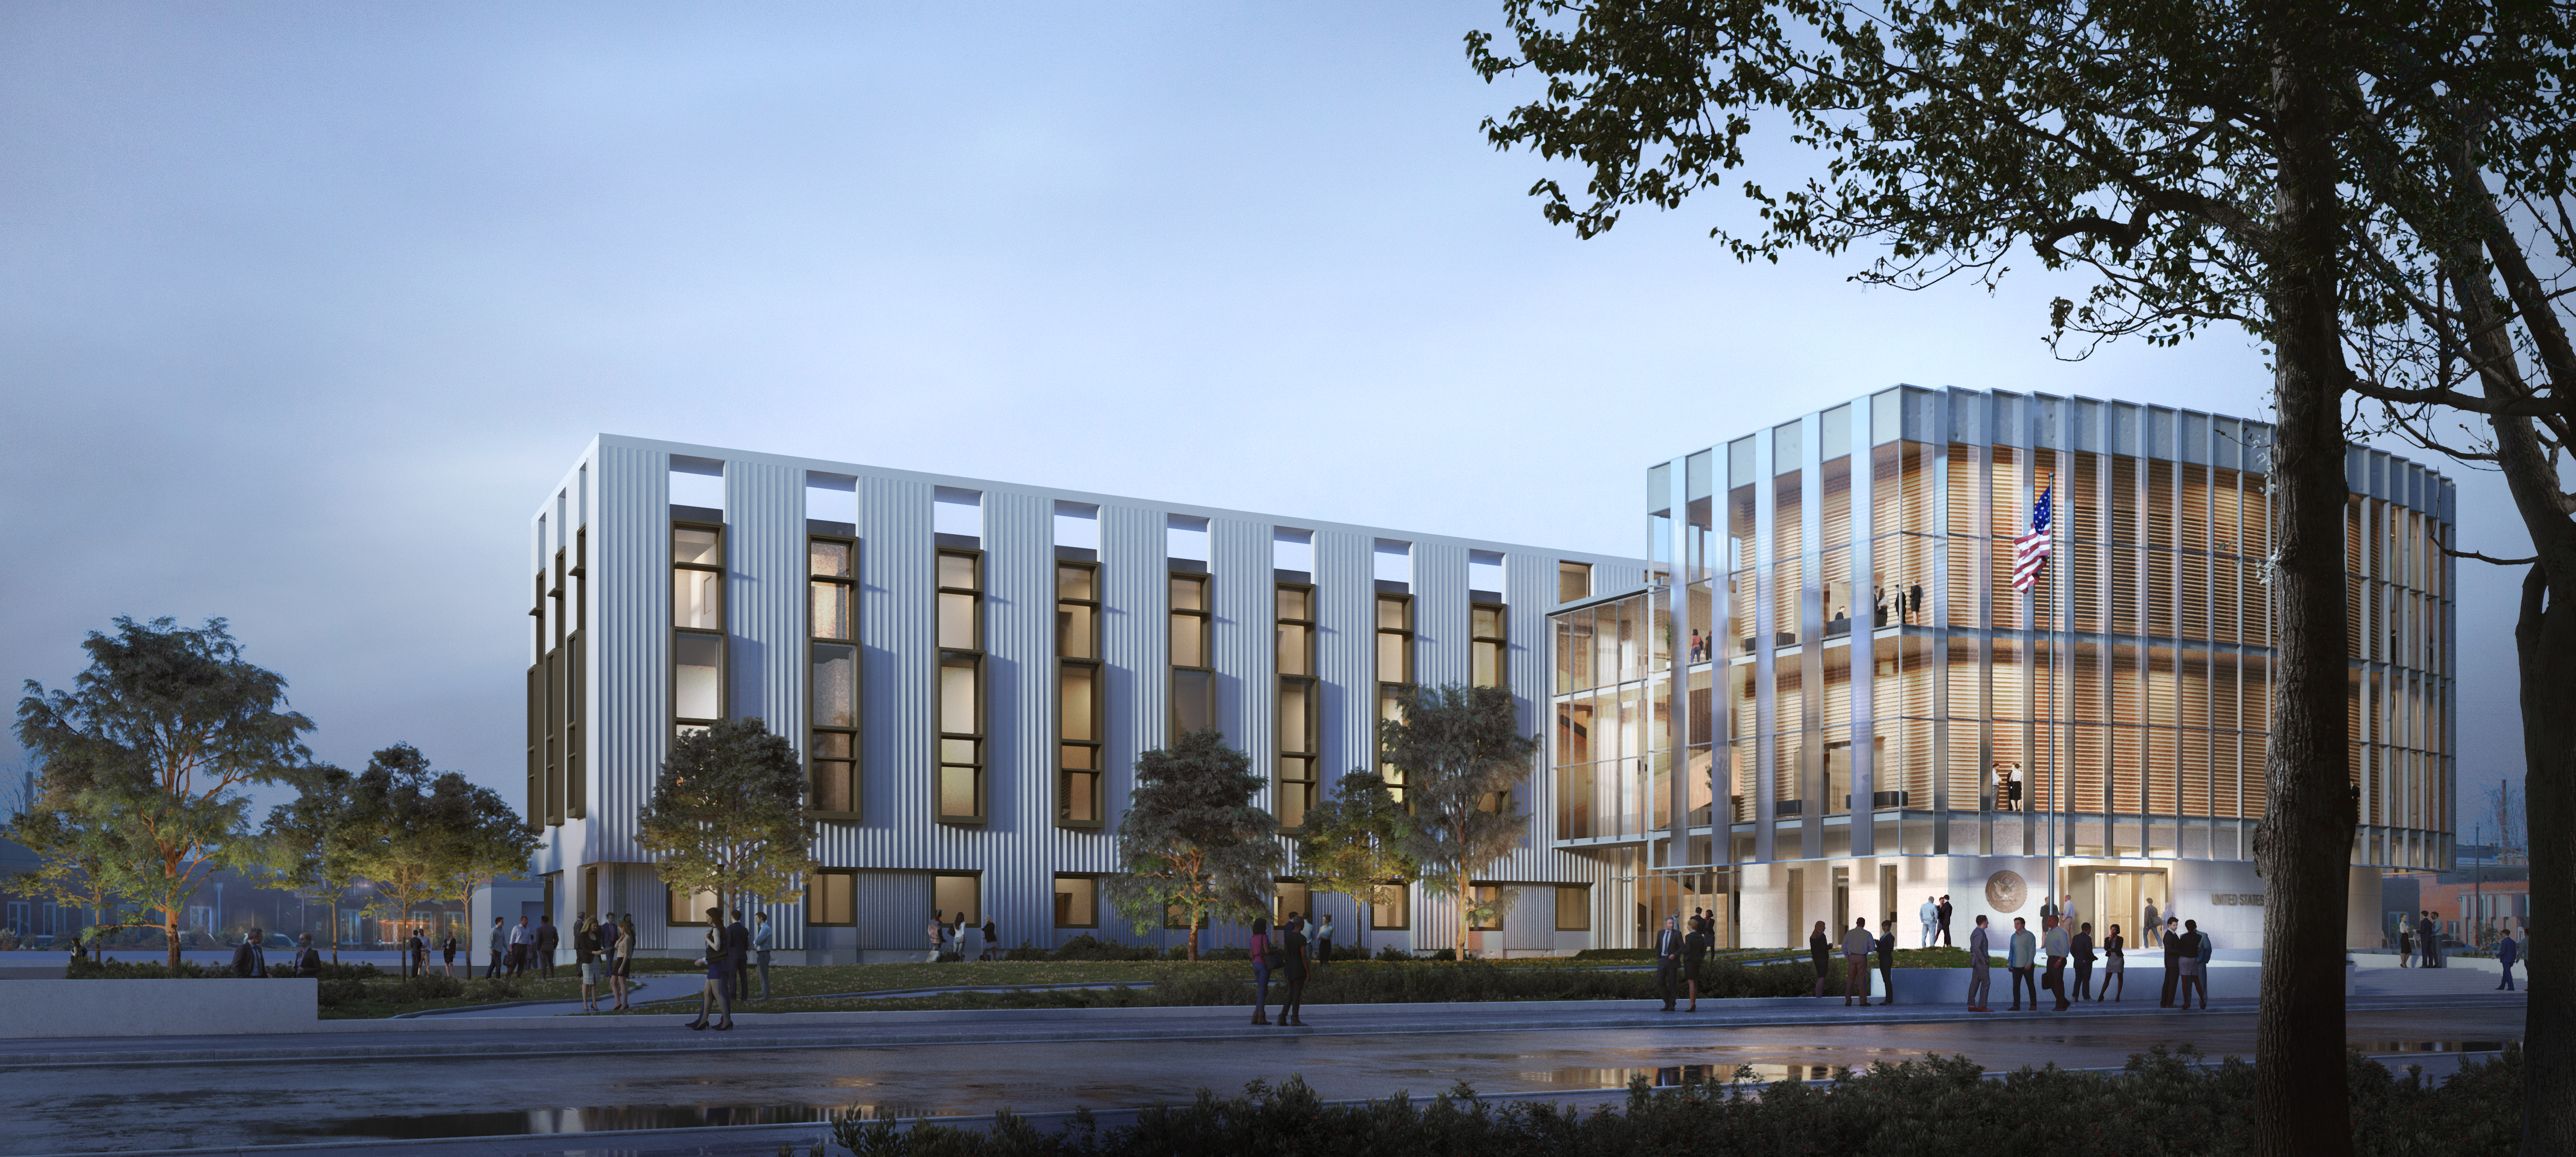 Greenville Federal Courthouse Rendering